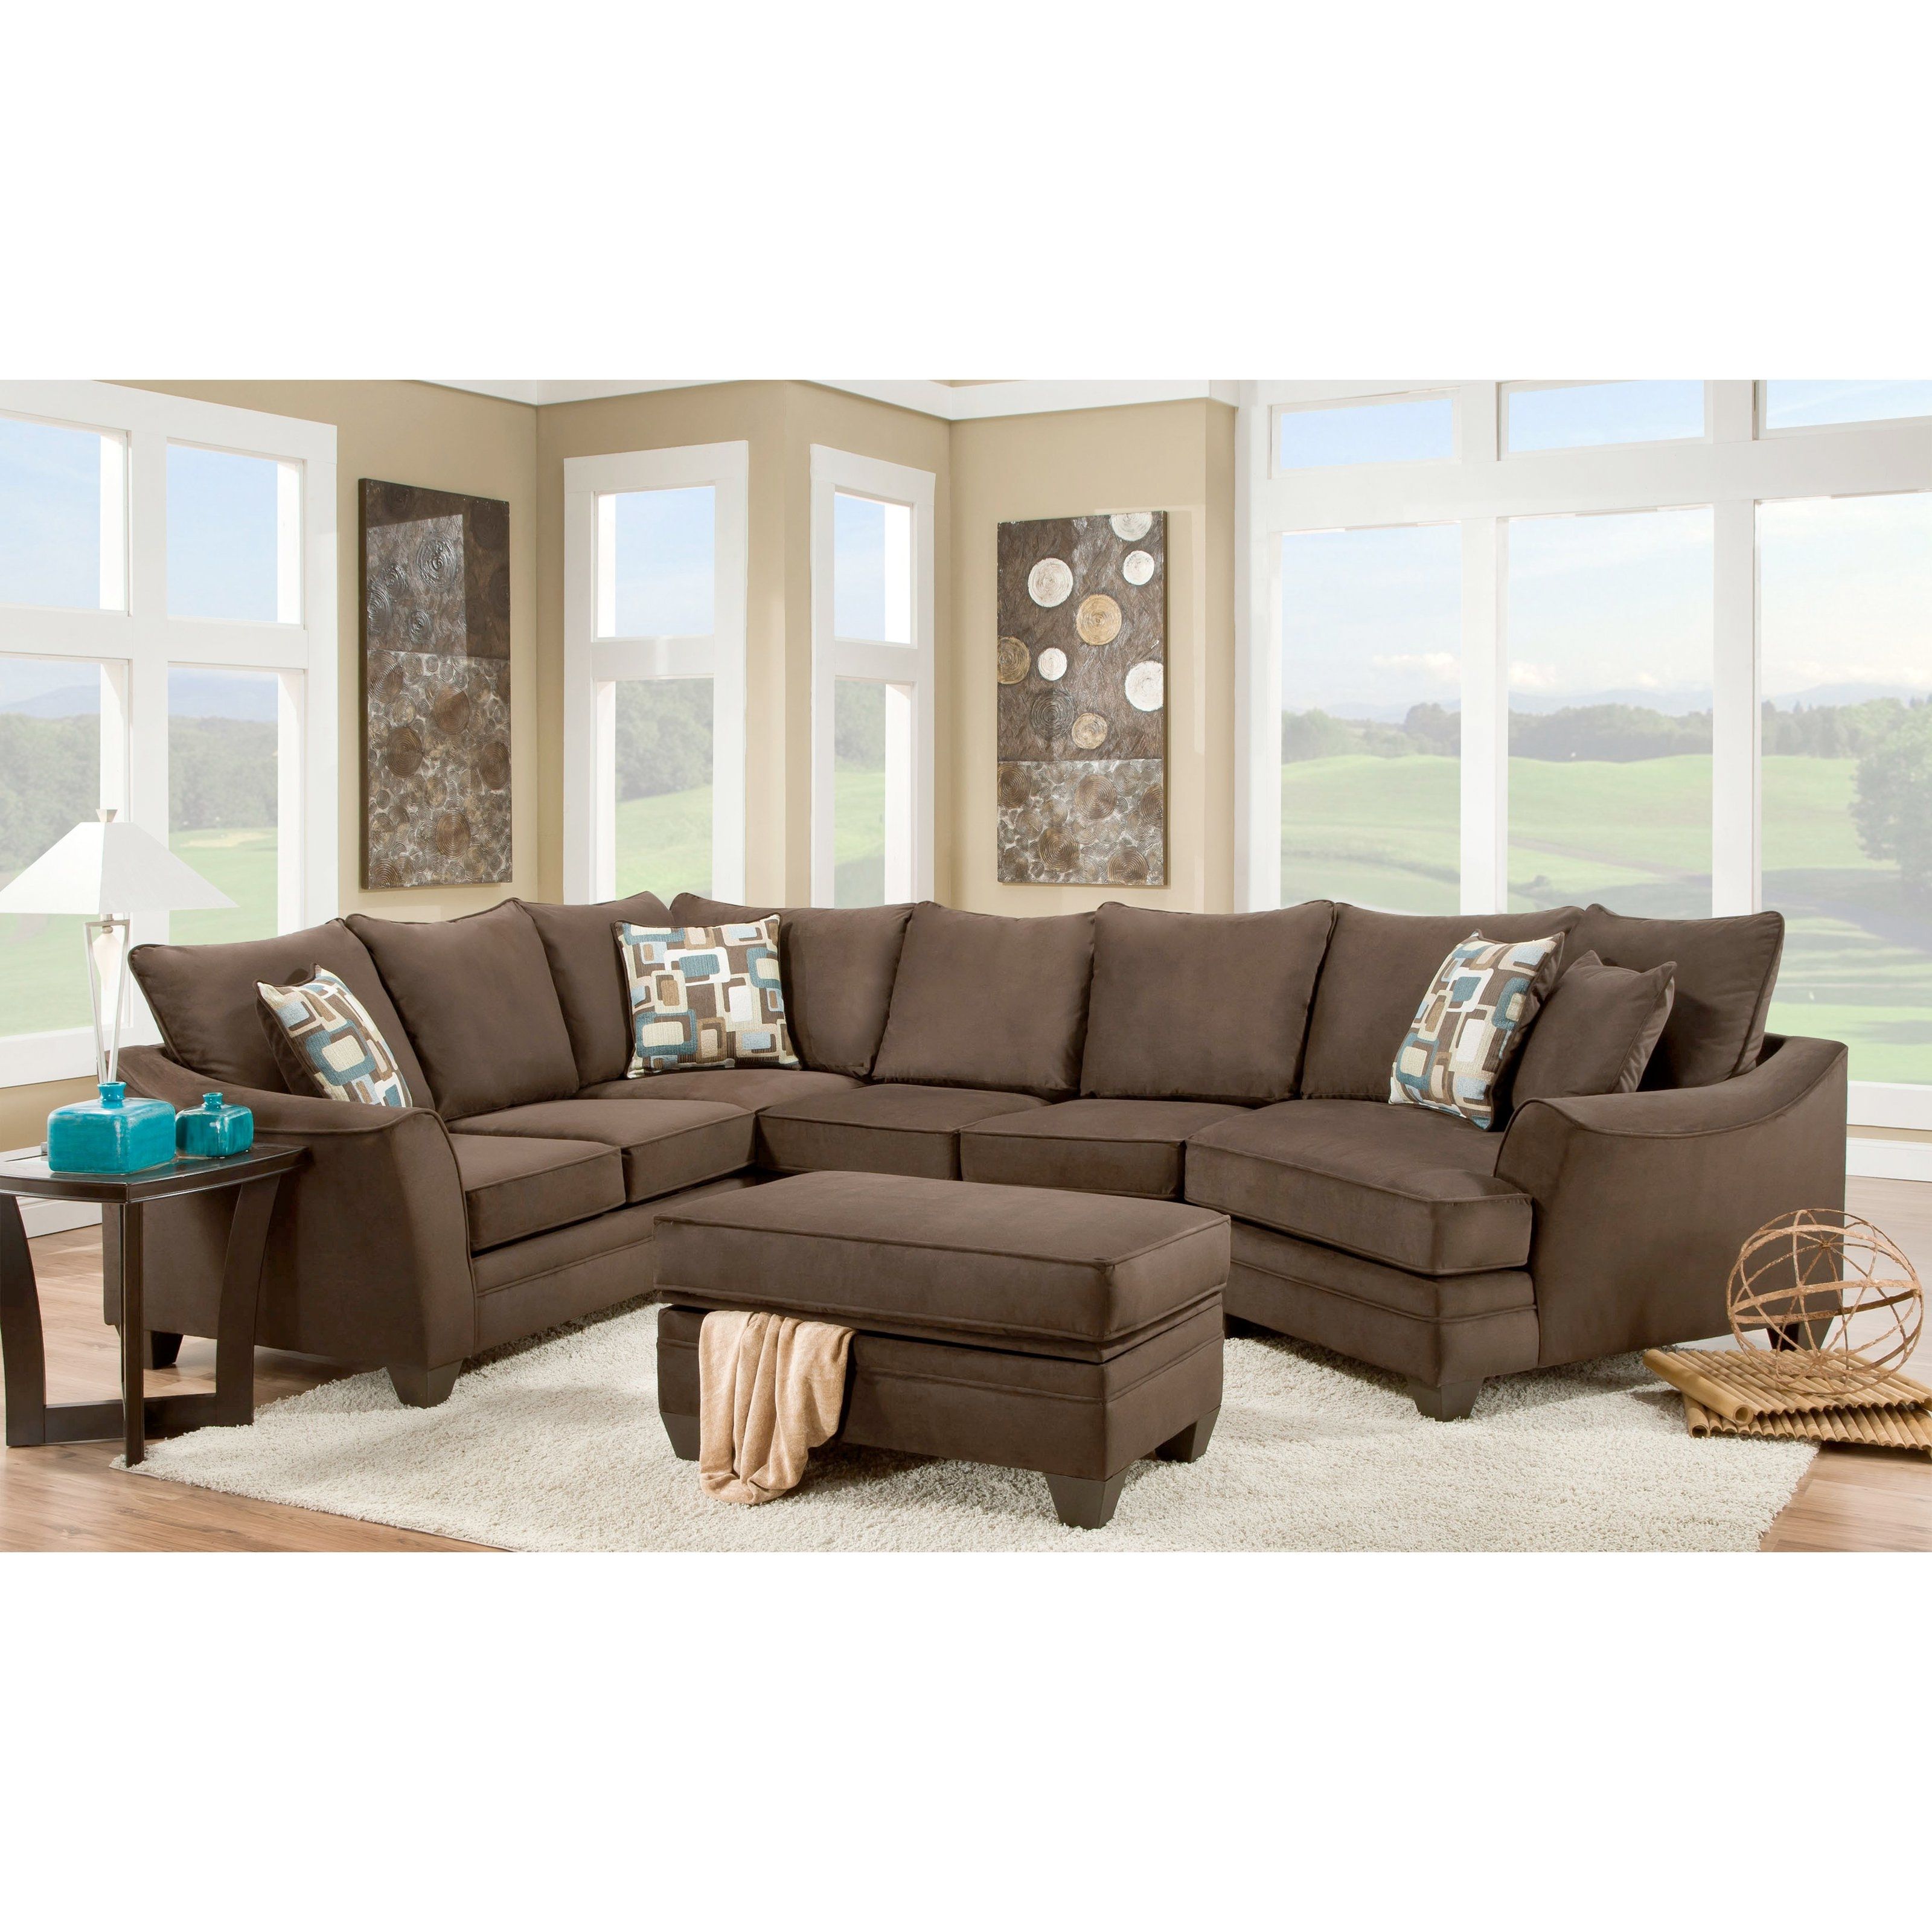 Featured Photo of The 10 Best Collection of Sectional Sofas in Greensboro Nc